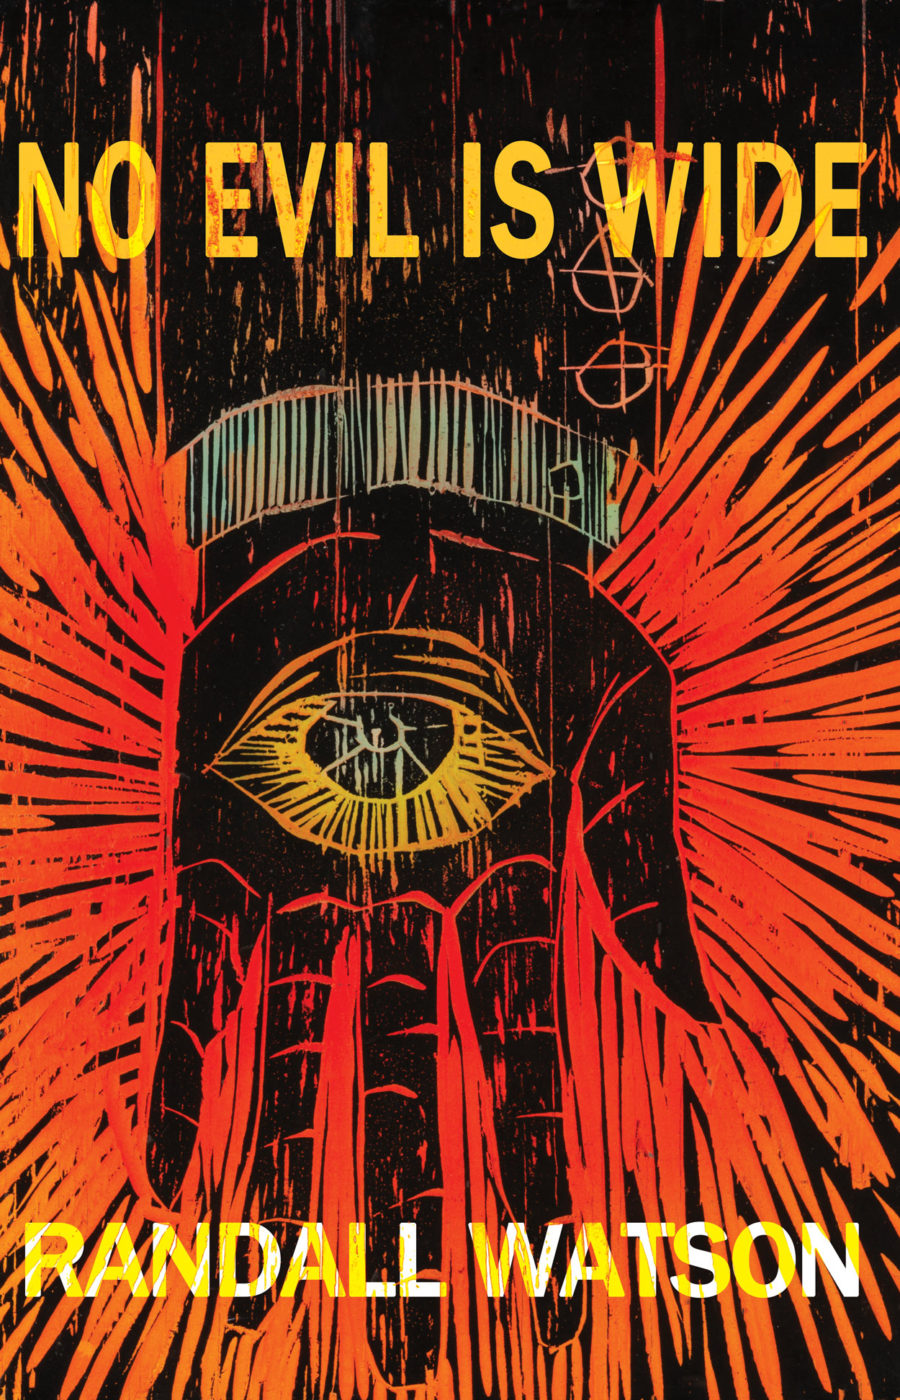 No Evil is Wide front cover. The lettering is yellow and in all caps superimposed over a painting of a black hand with an eye in the middle of it. The whole is on a bright red background with lines radiating out from the center of the space behind the hand.